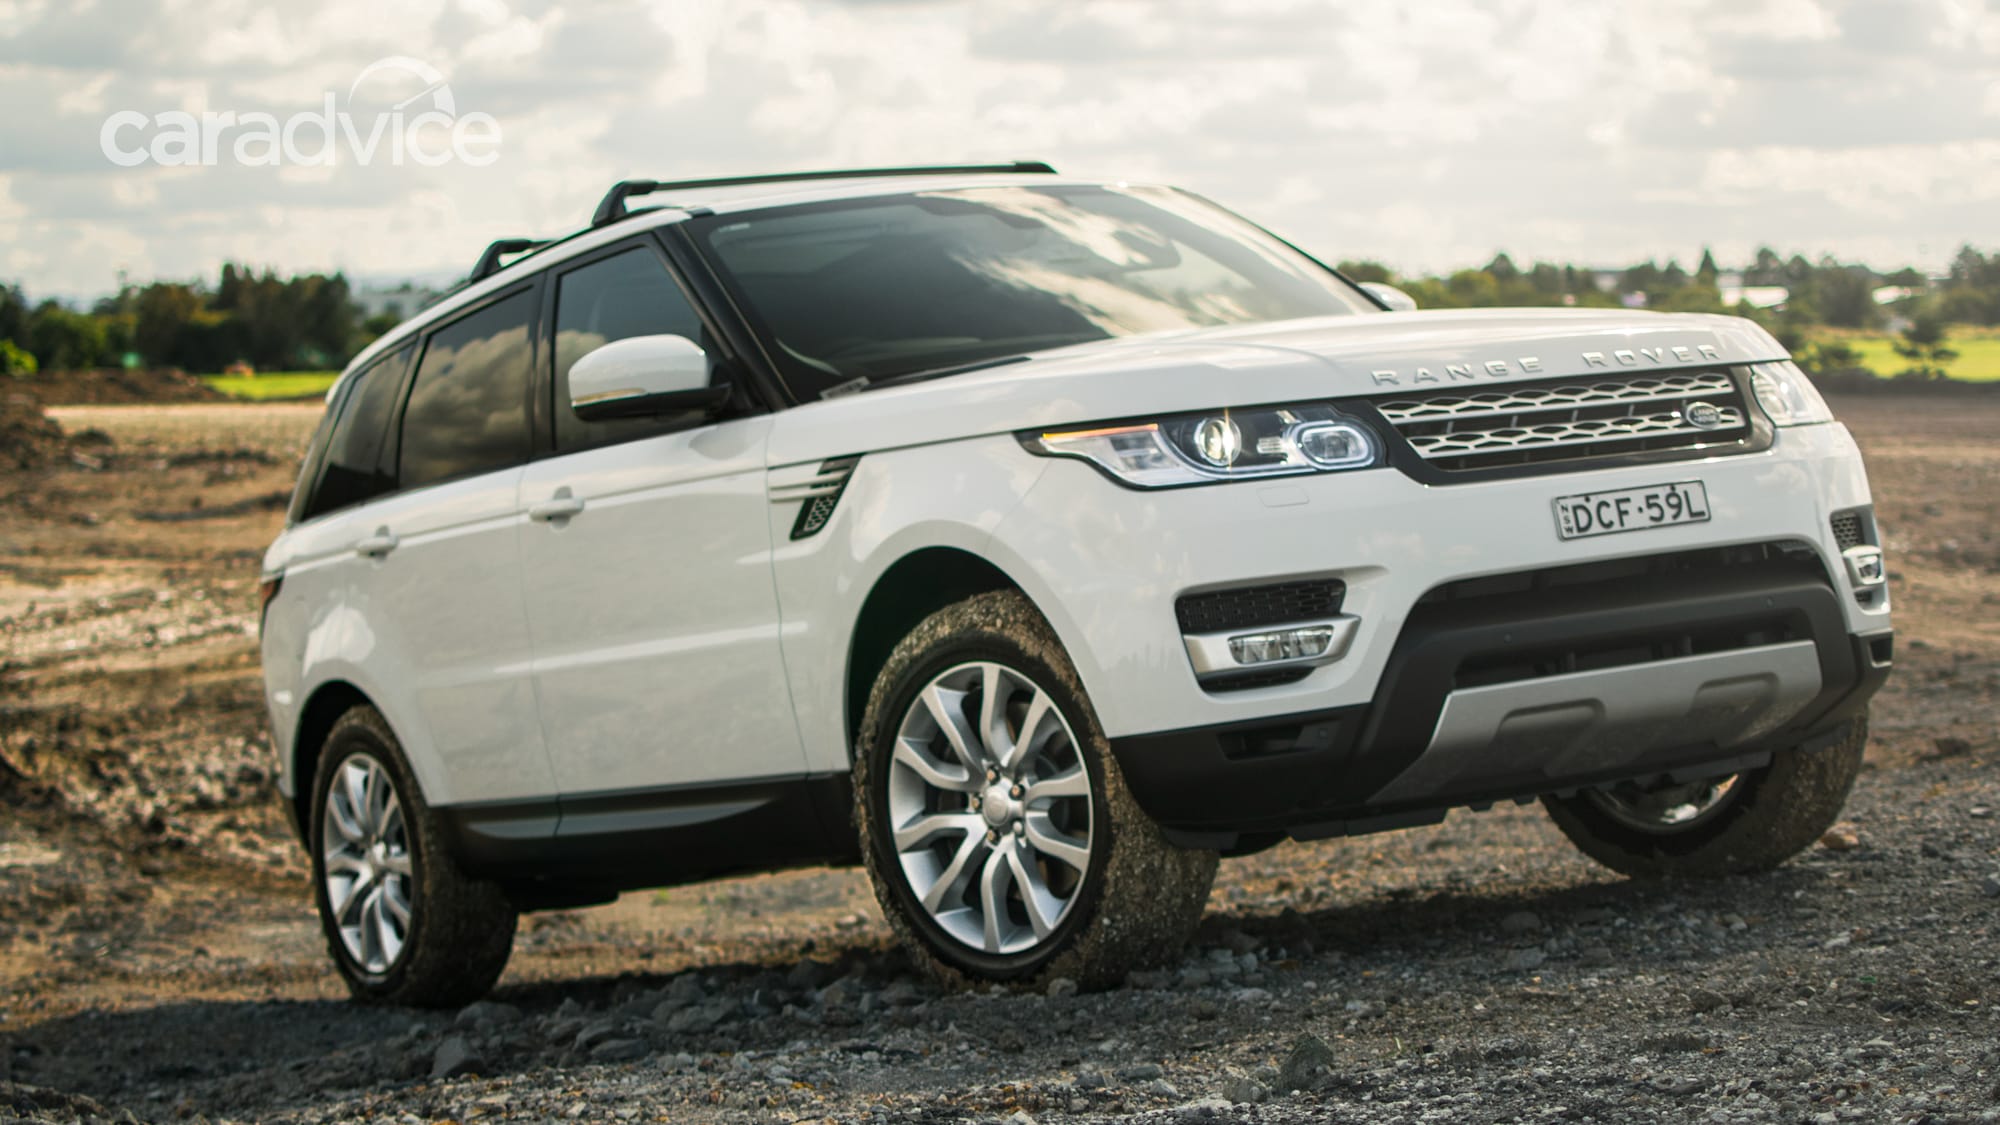 2016 Range Rover Sport Sdv6 Hse Review Caradvice